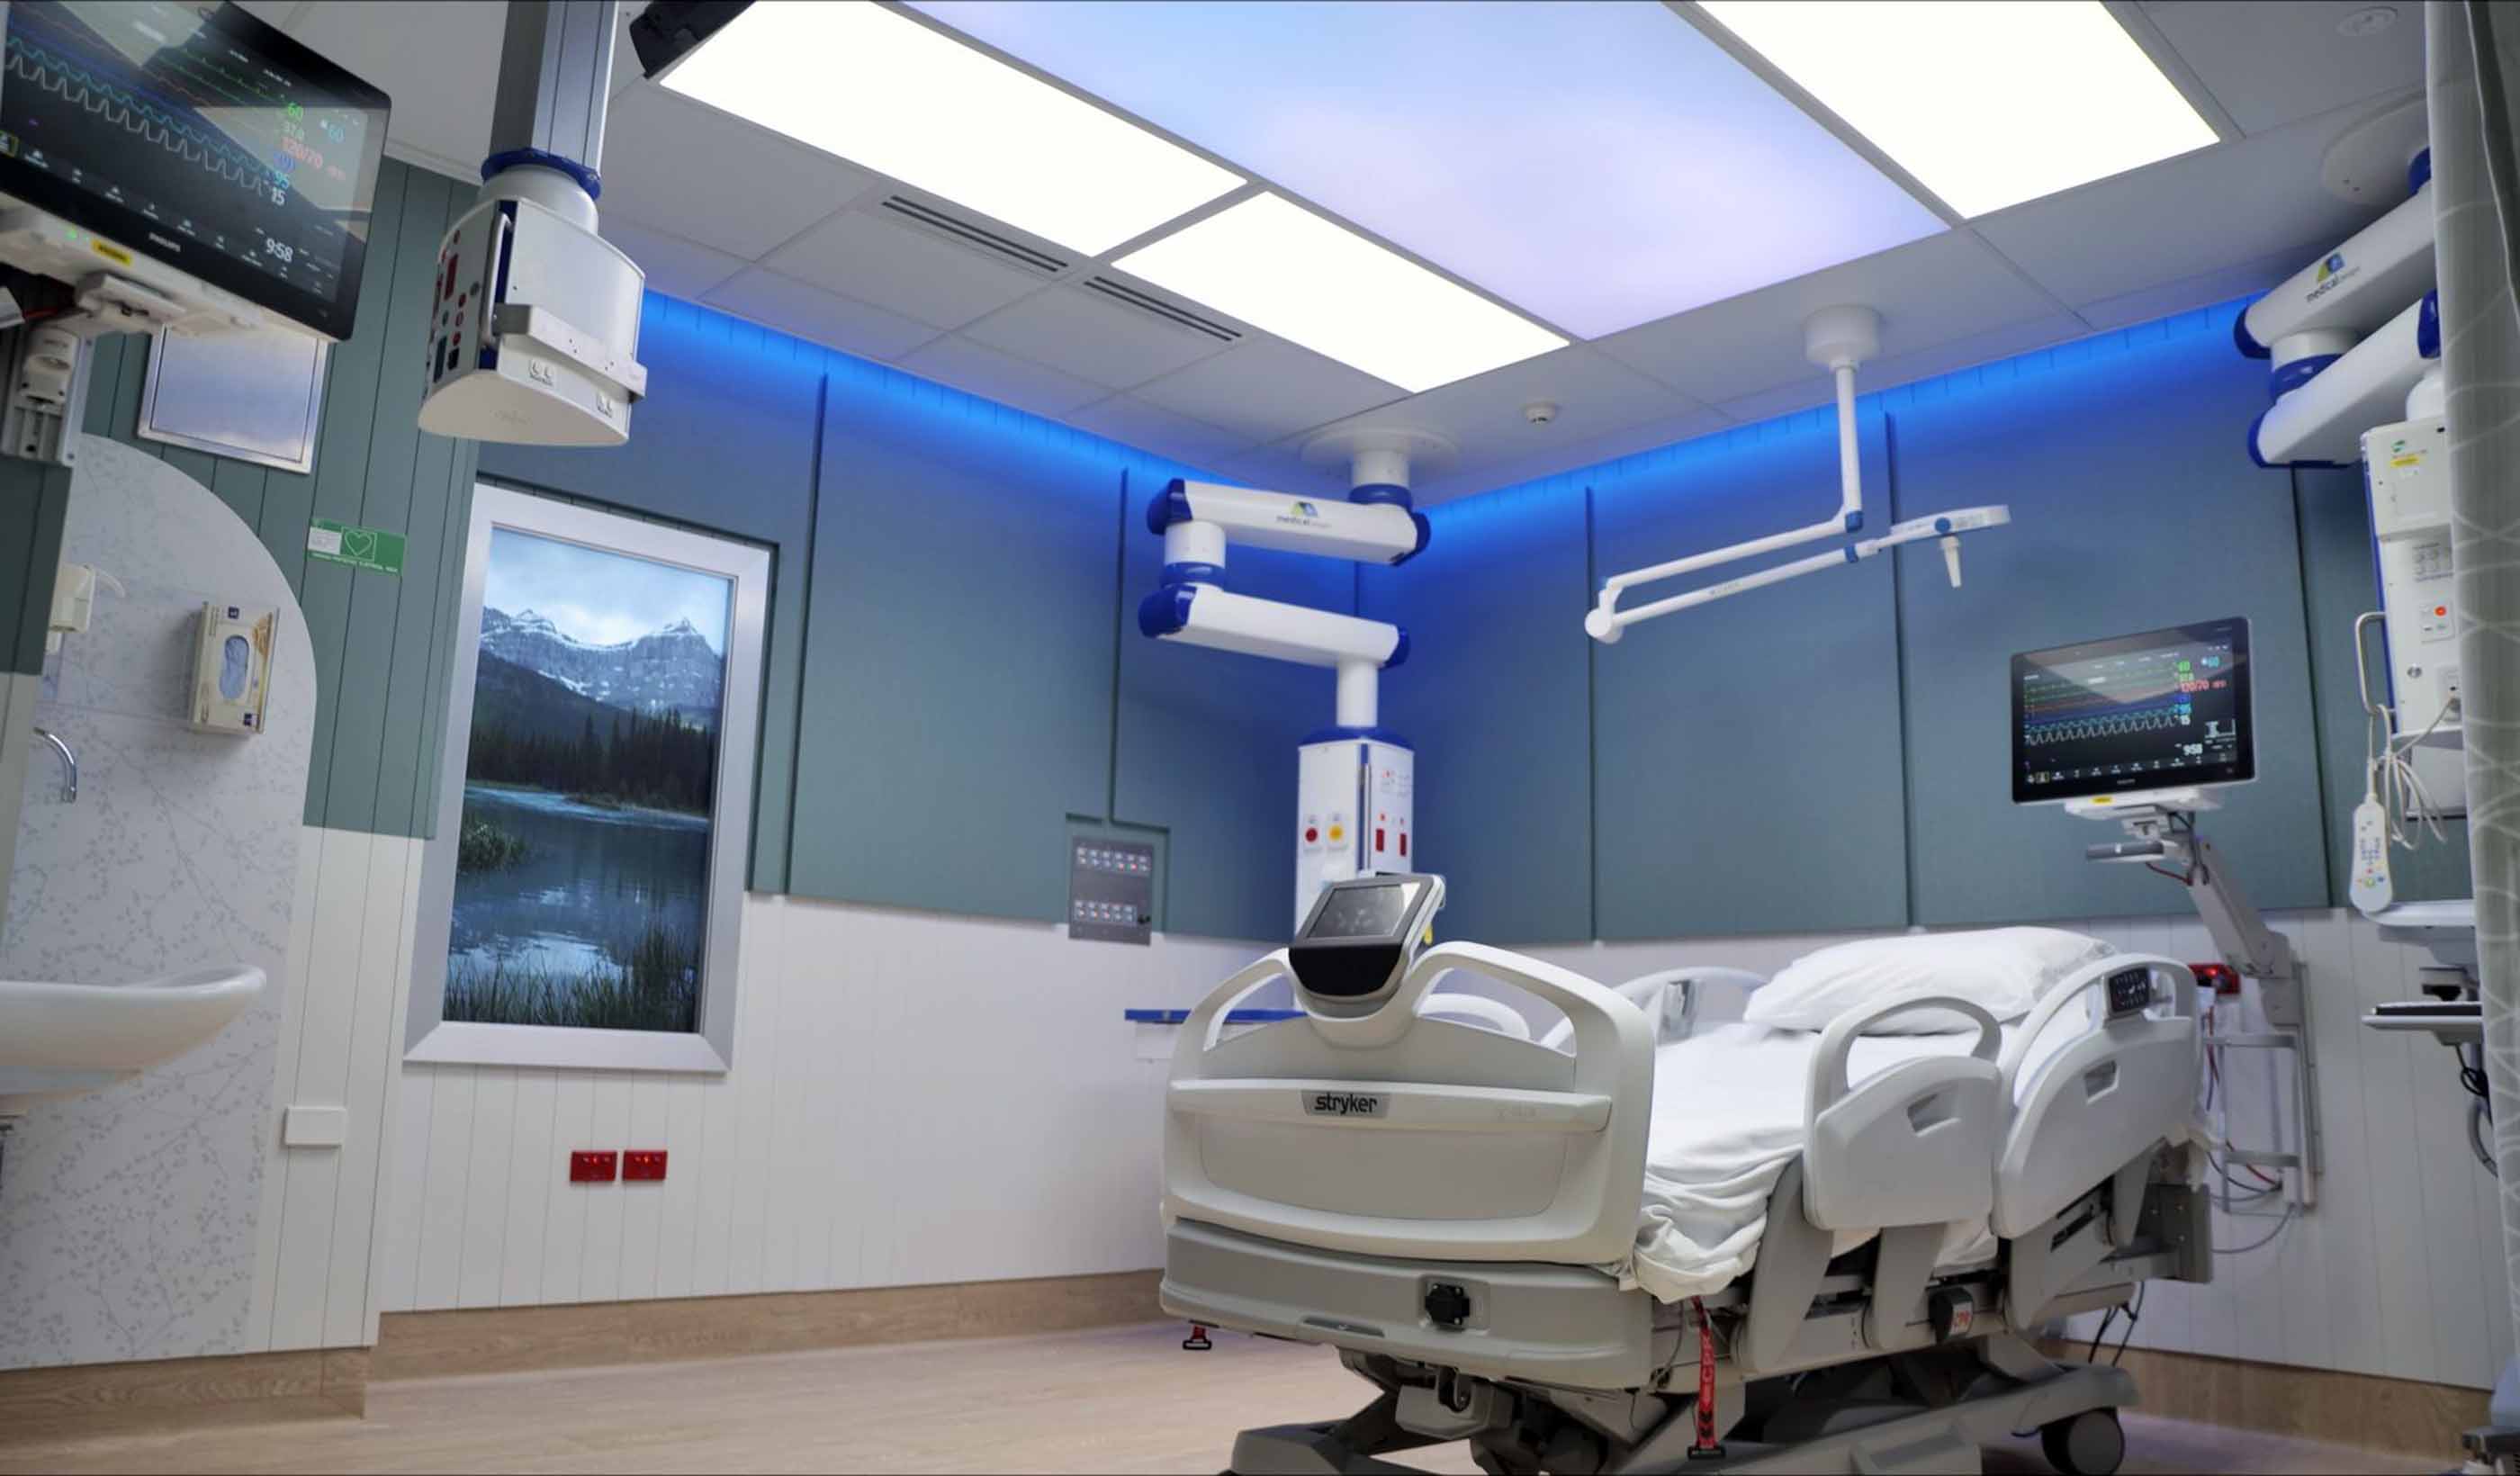 Reshaping ICU bedspace into a calm, comfortable environment where patients thrive